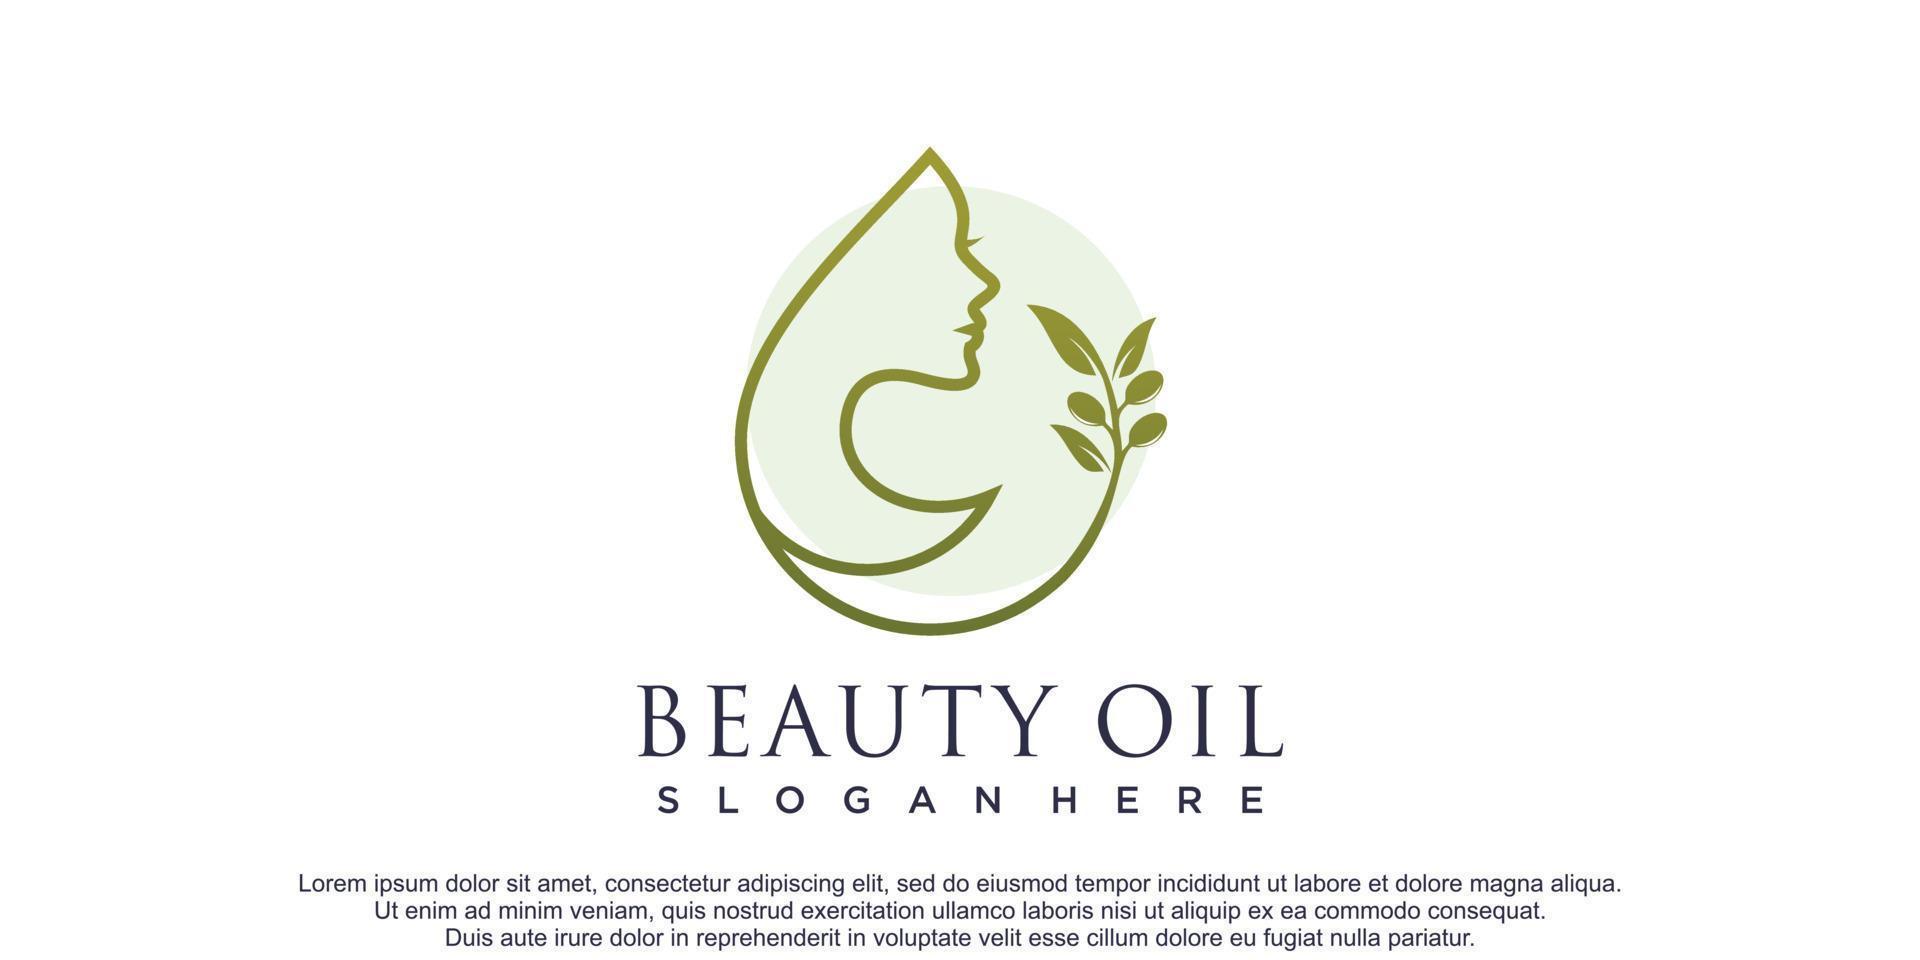 Beauty olive logo illustration with creative design vector